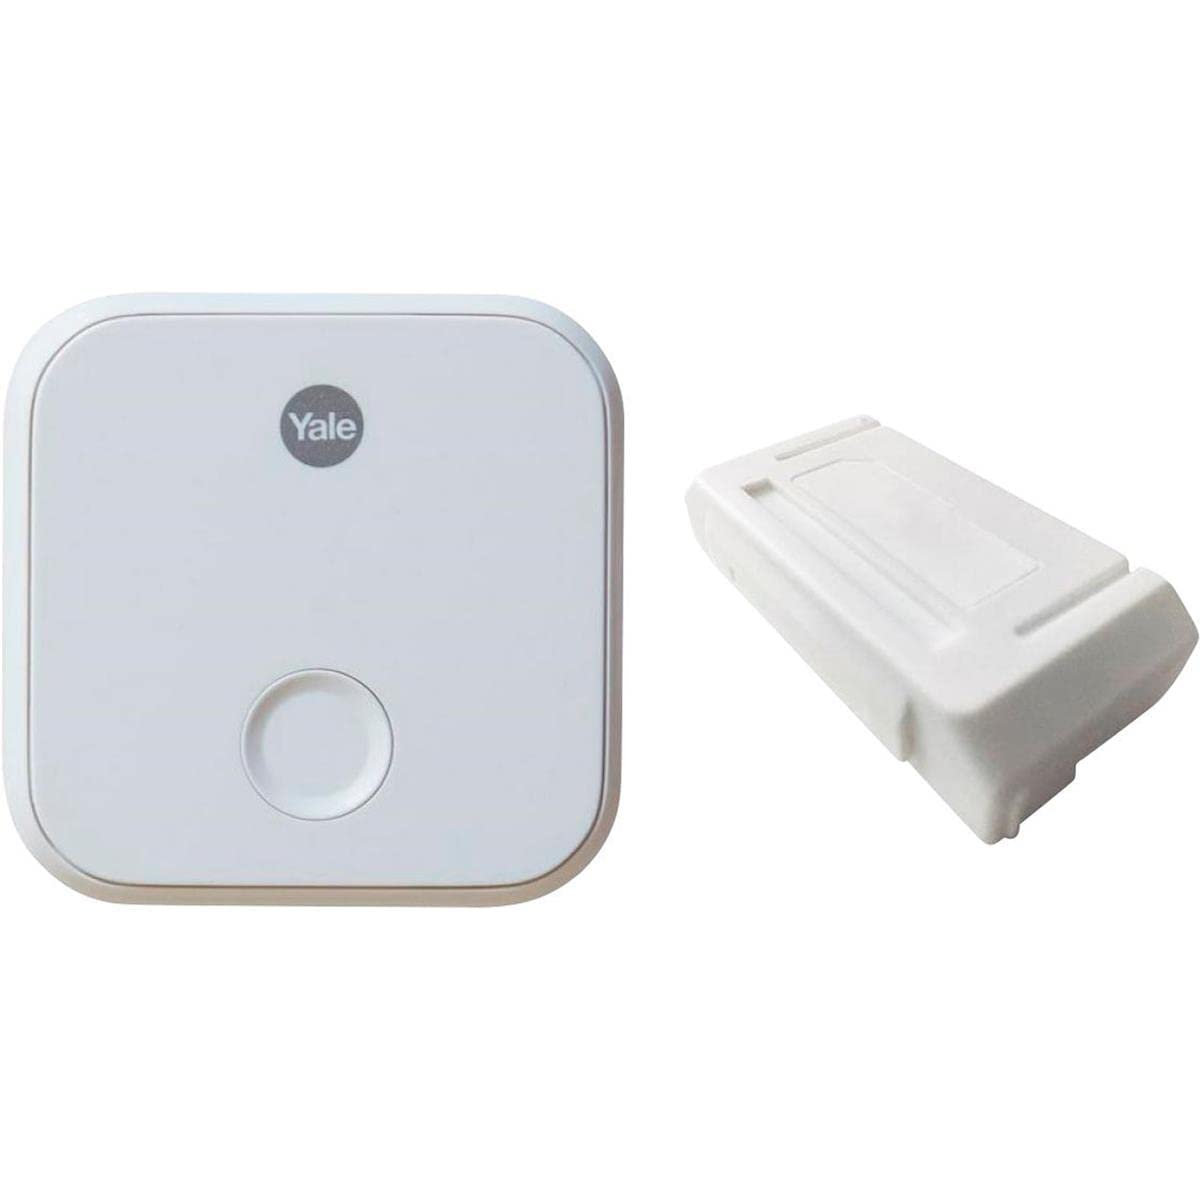 Yale Security AYR202-CBA-KIT Connected by August Upgrade Kit for Assure Locks-Compatible with Alexa, Google Assistant and HomeKit (Siri), White